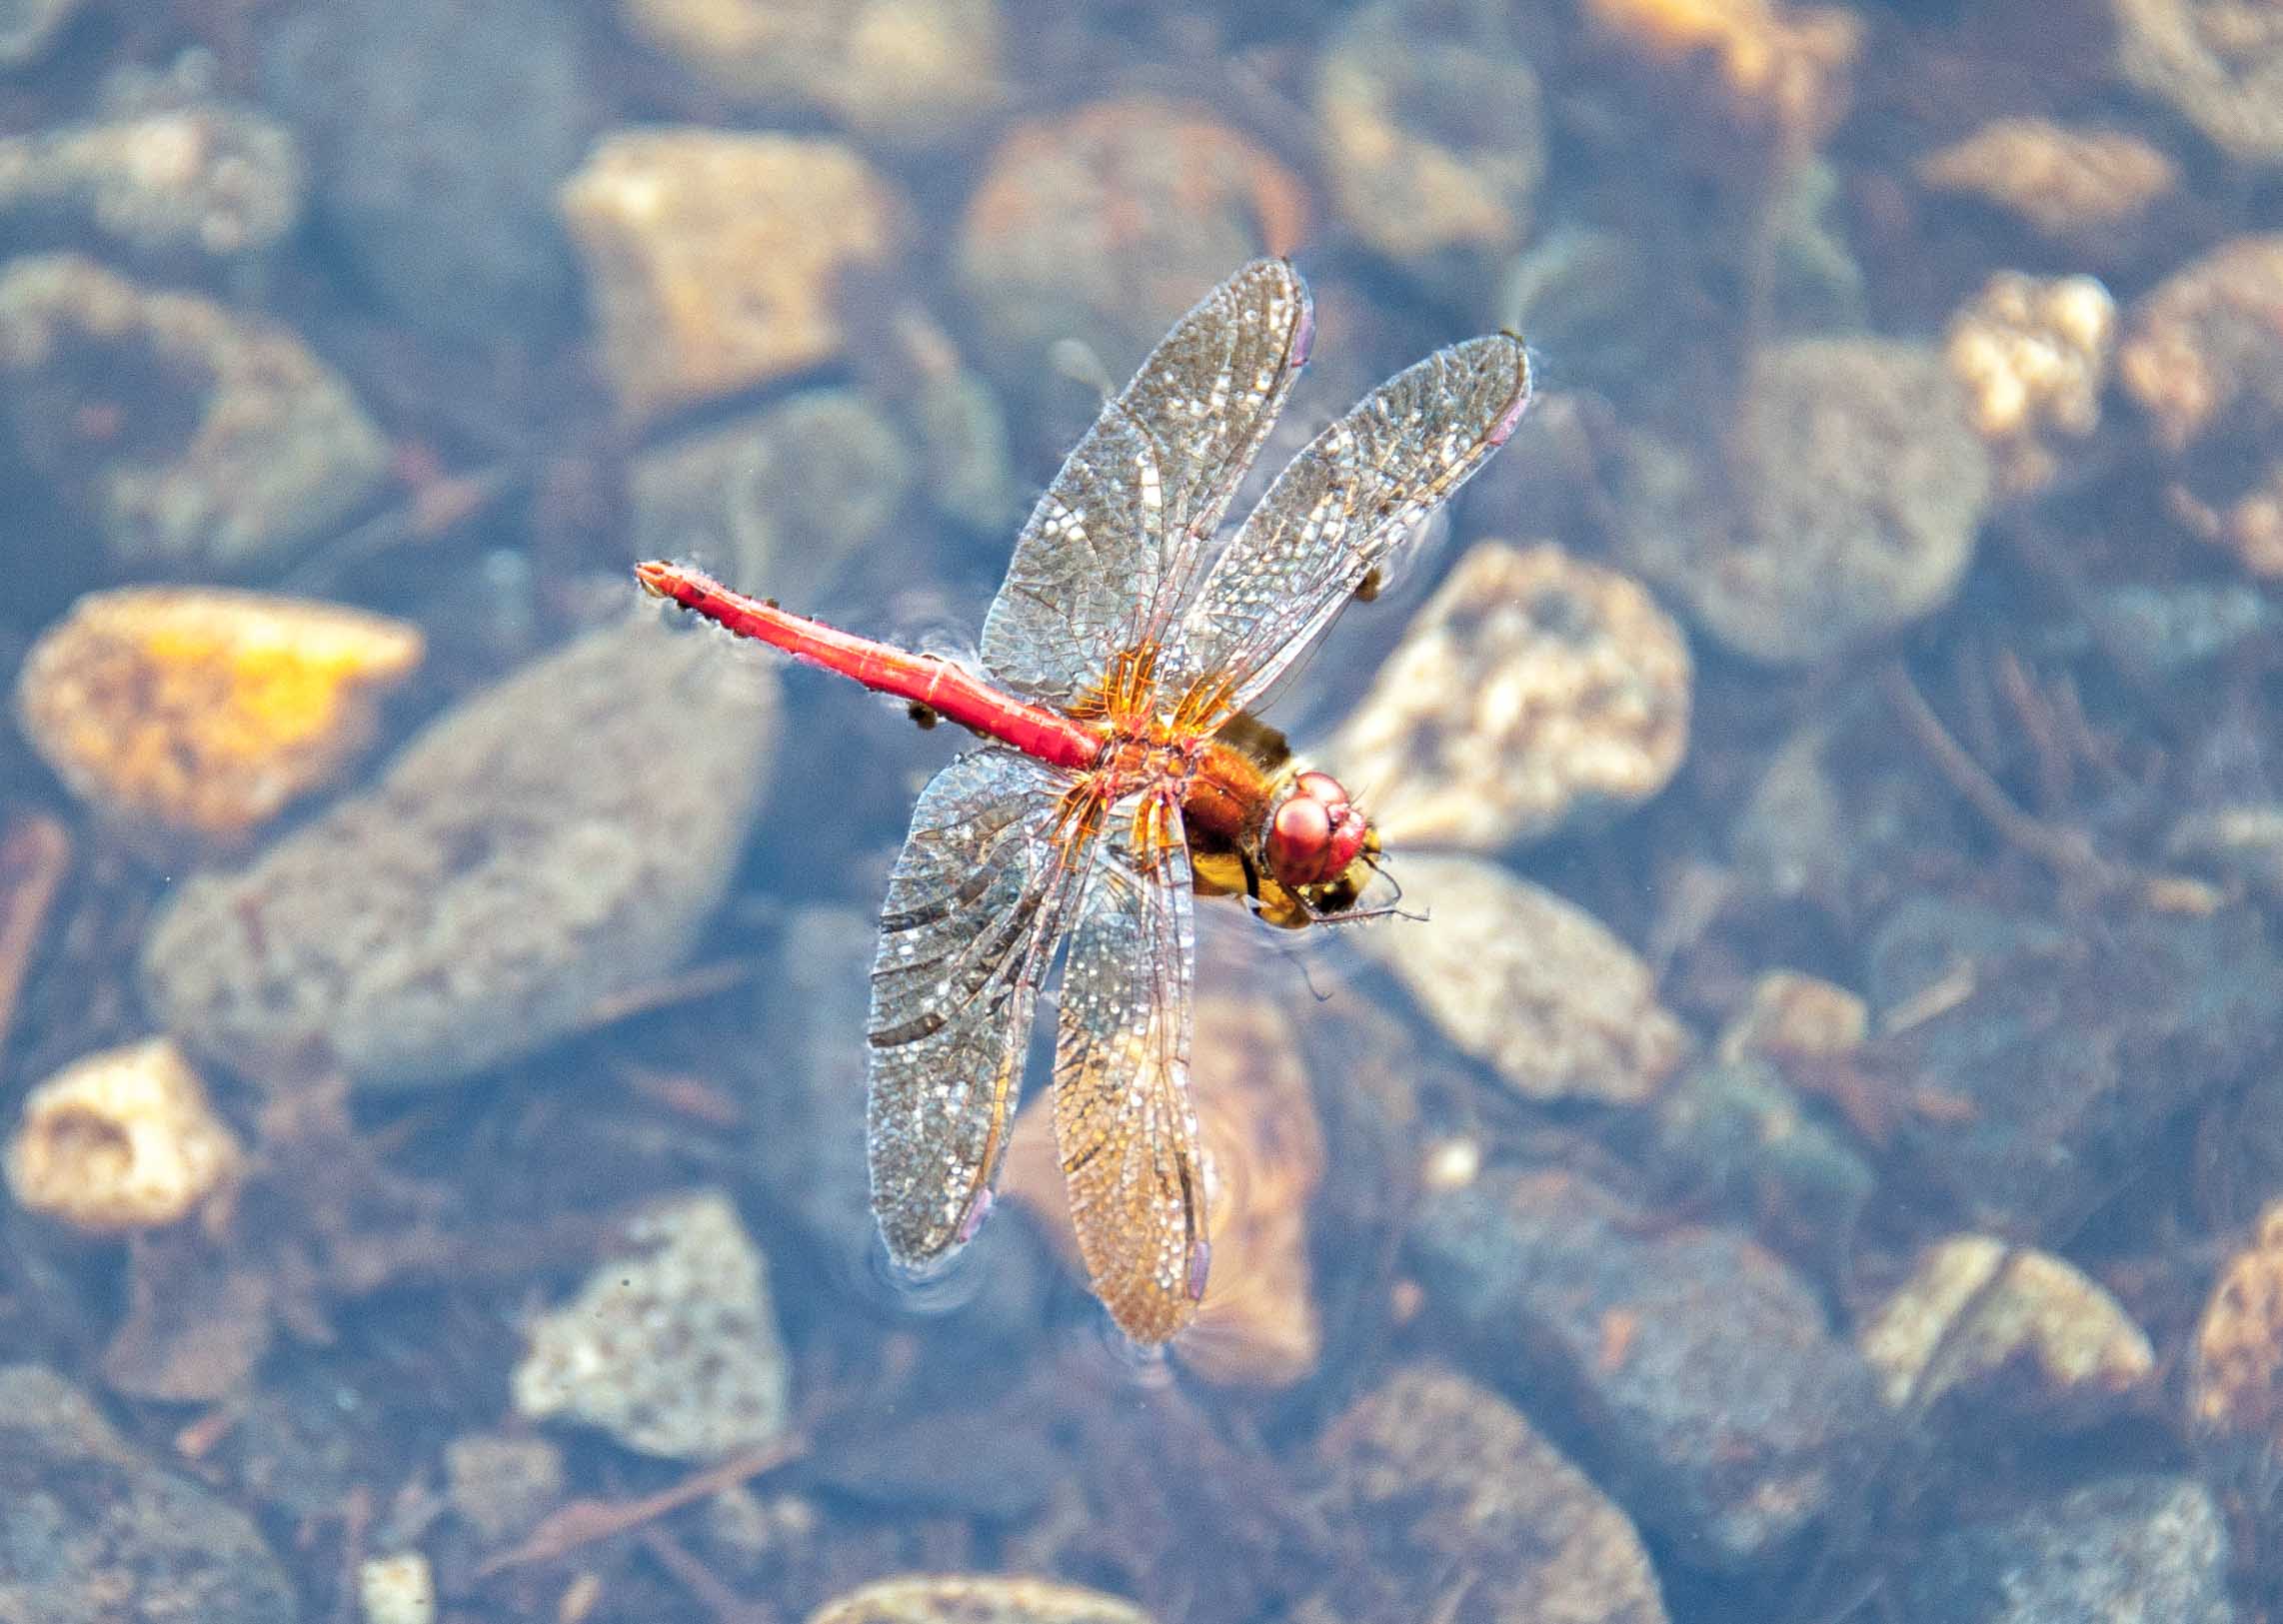 Skip's First Tuesday Tips, Tip 8, Adult Dragonflies Can Make for Exciting Fishing